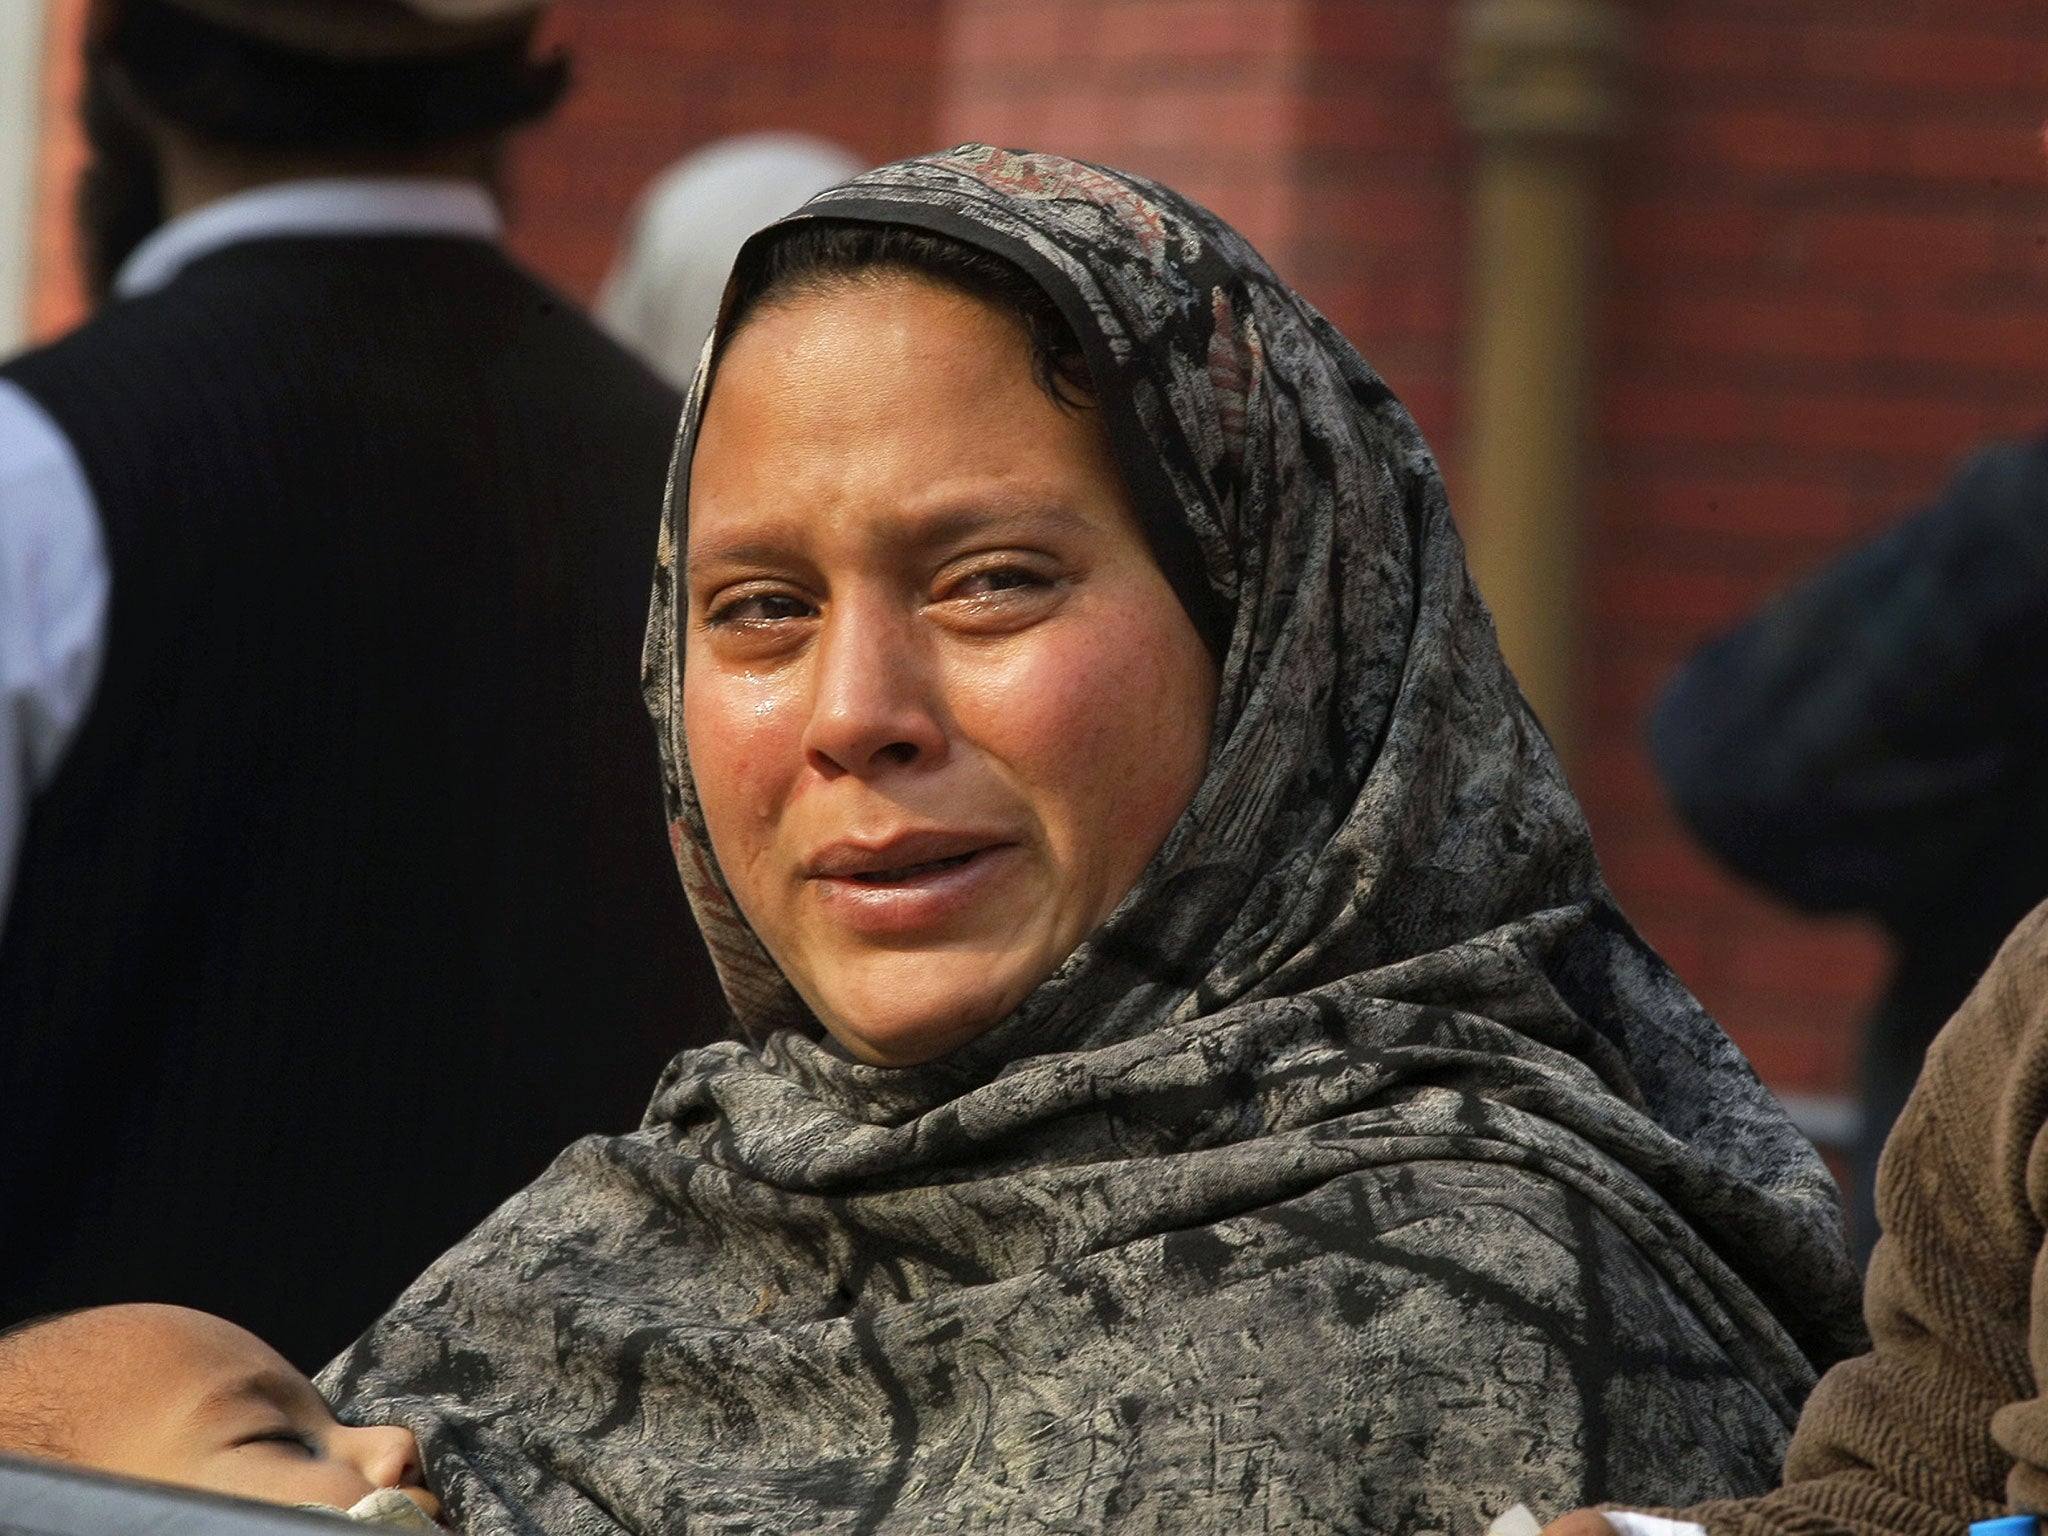 A Pakistani woman weeps as she waits at a hospital, where victims of a Taliban attack are being treated in Peshawar